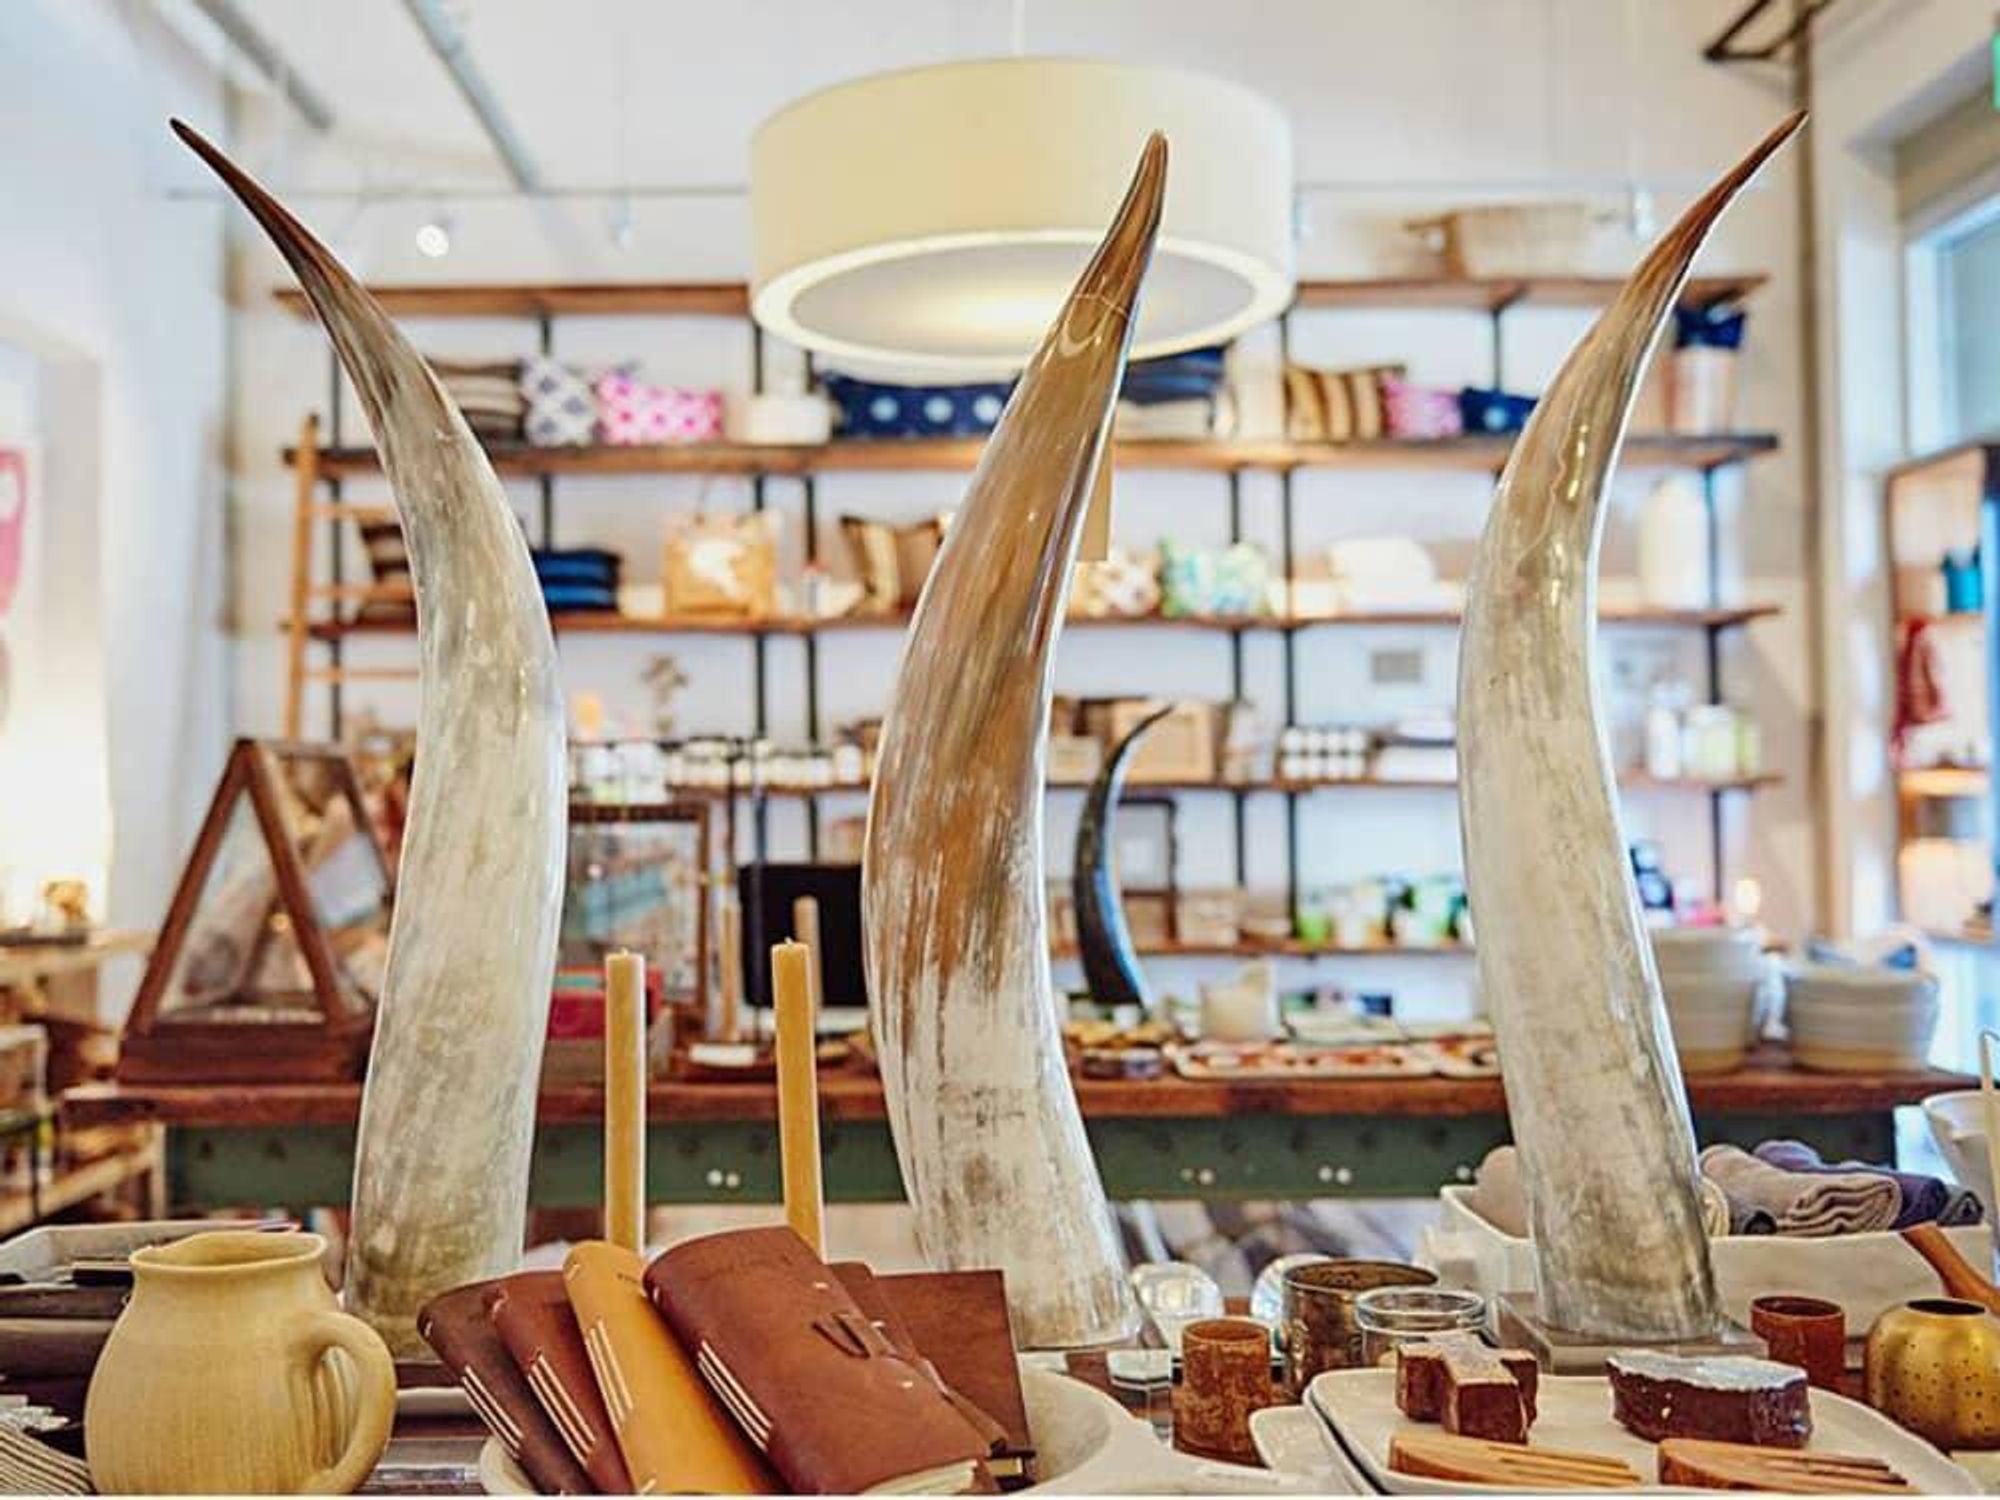 Shop Local! The 10 best local shops in Plano to grab some great gifts -  Local Profile